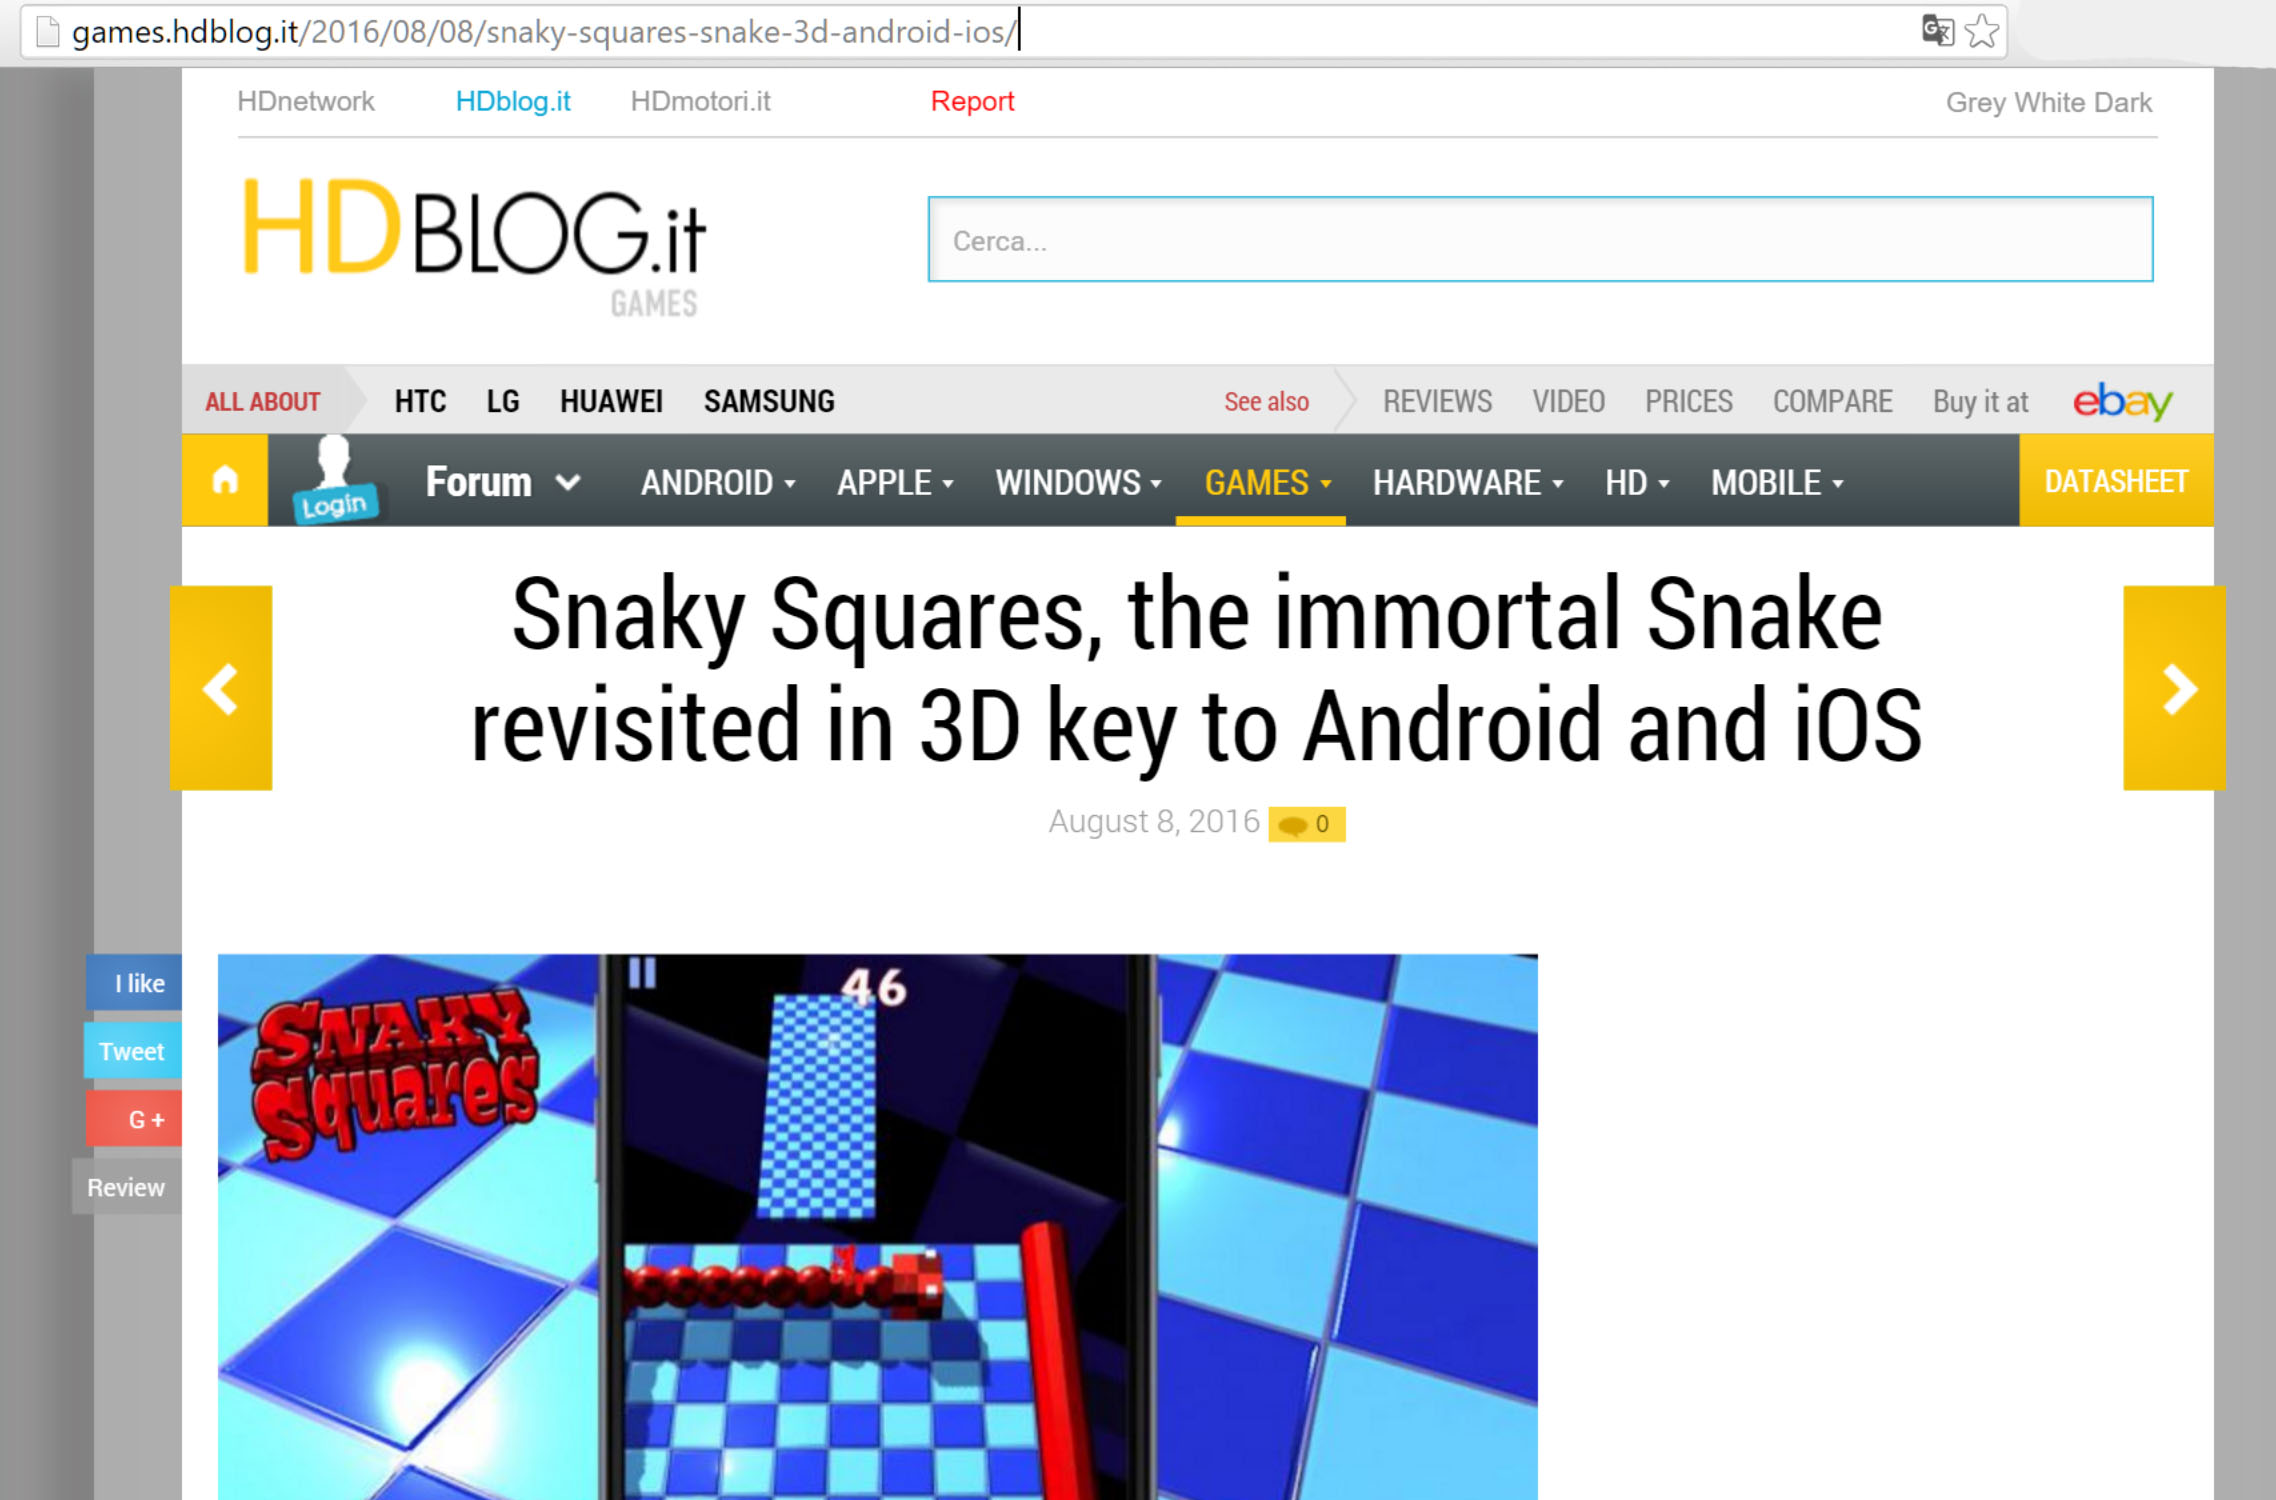 Snaky Squares review on hdblog.it